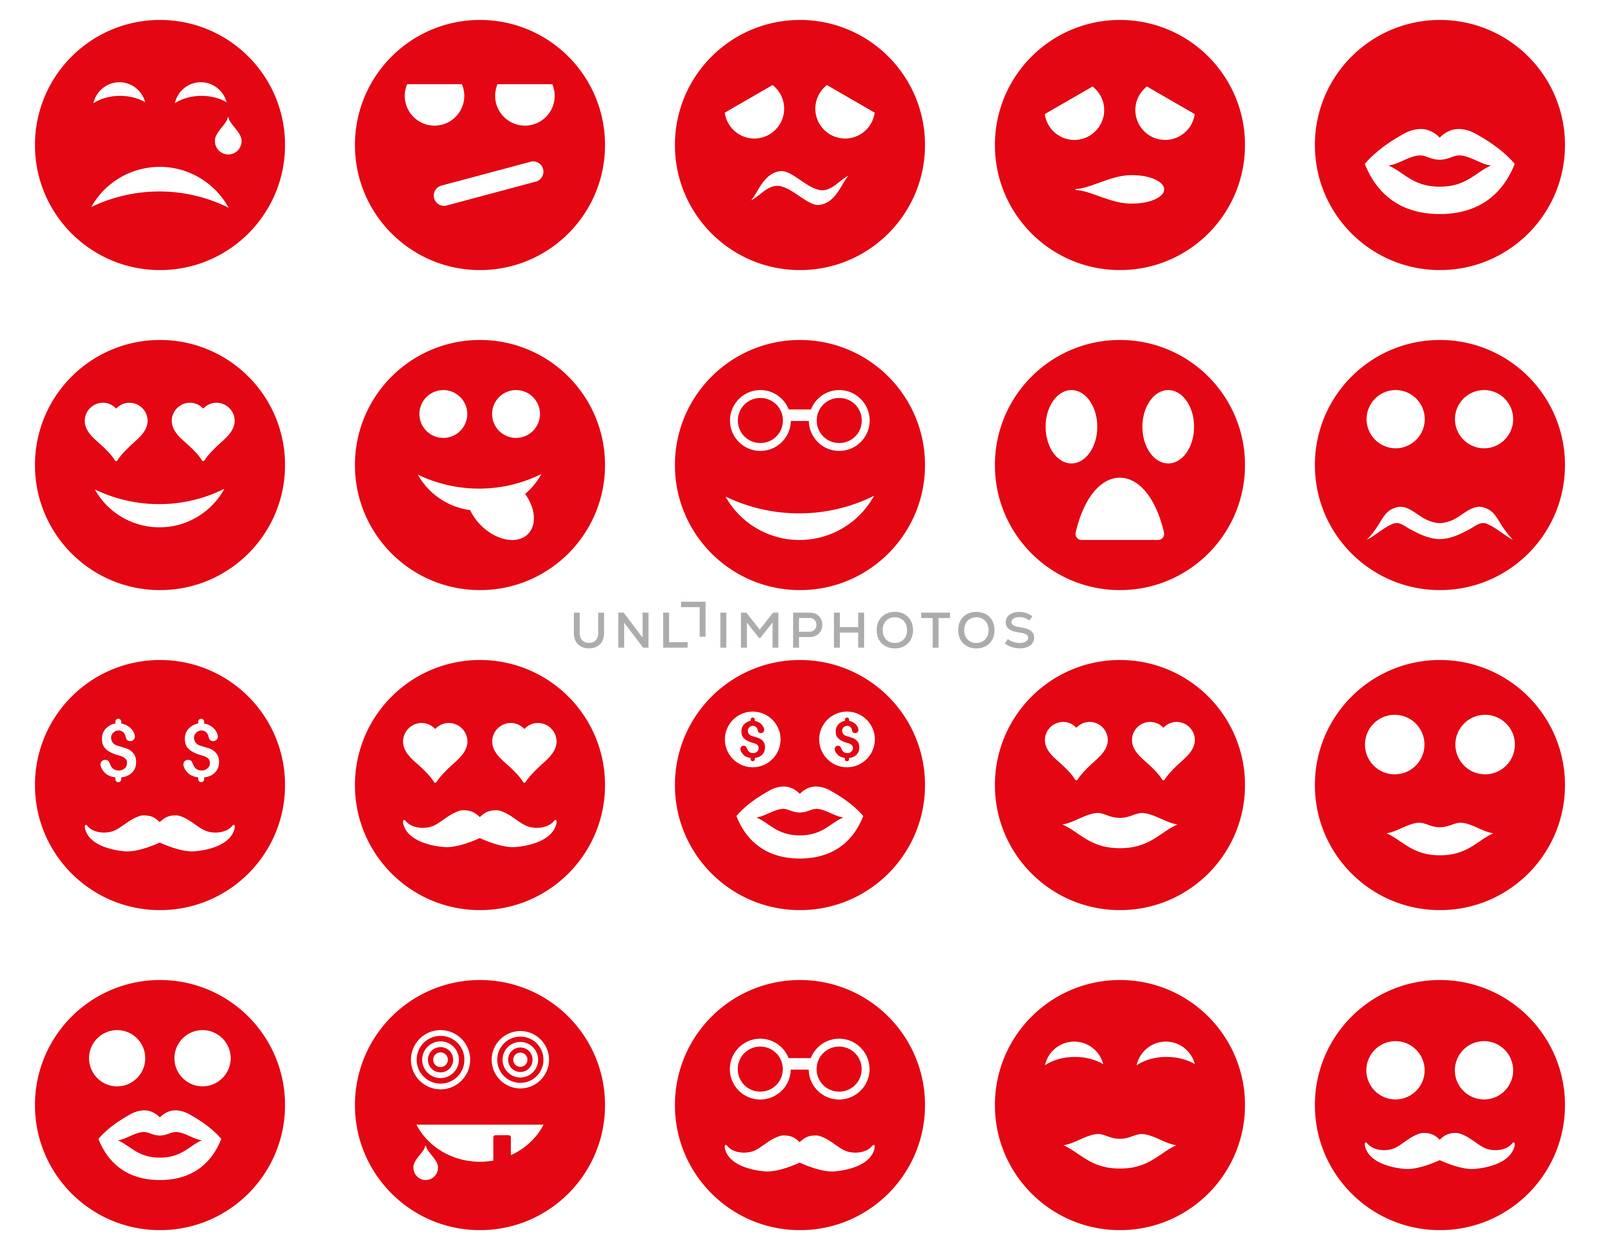 Smile and emotion icons. Glyph set style is flat images, red symbols, isolated on a white background.